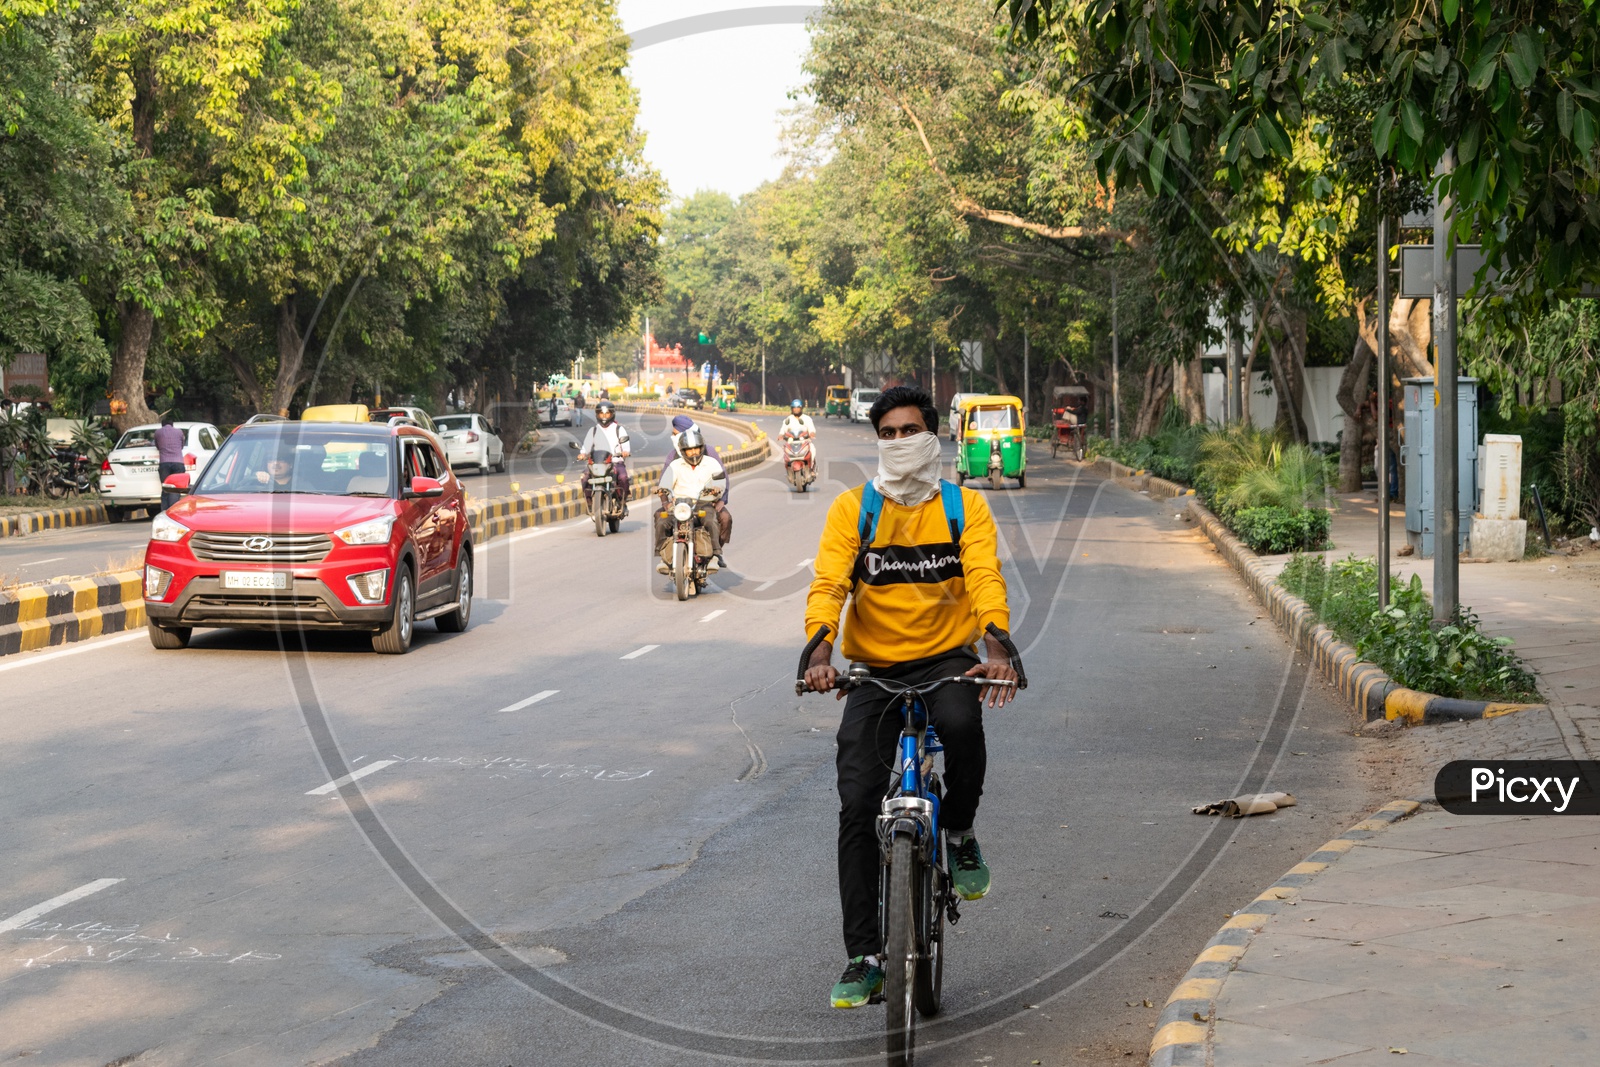 A man riding bicycle, covering his face with handkerchief to avoid pollution